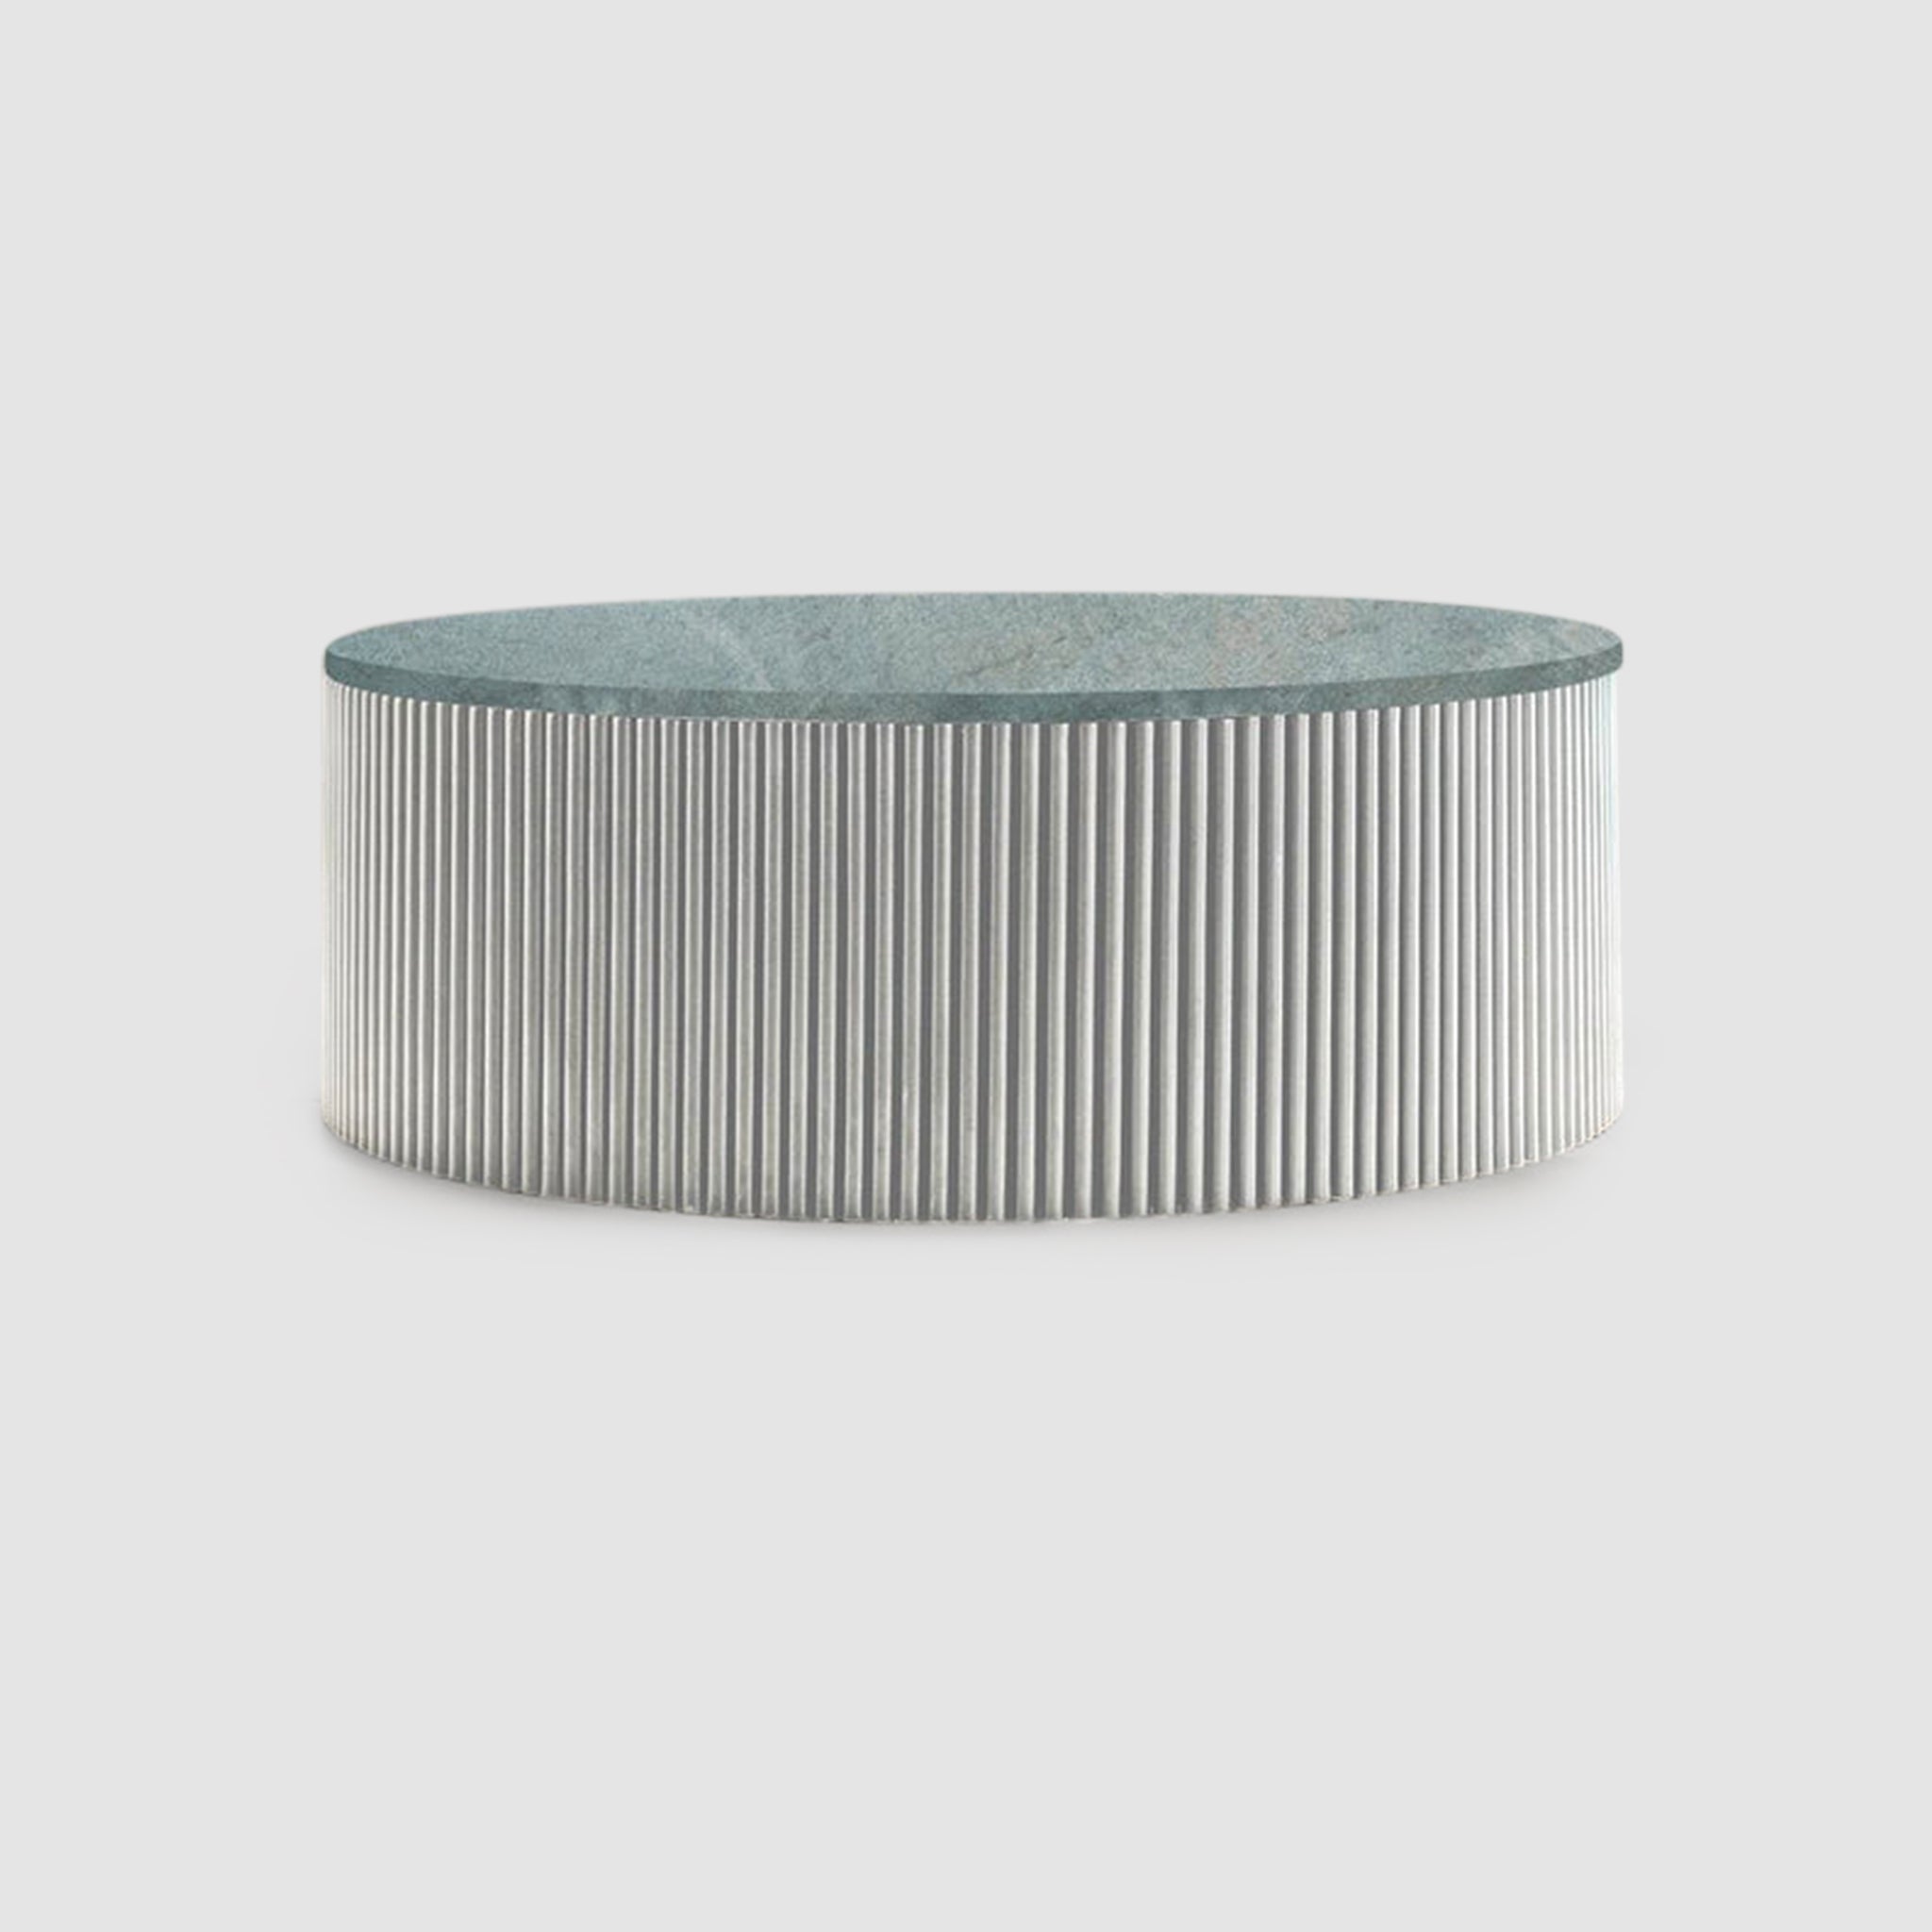 "Modern round coffee table with ribbed detailing"